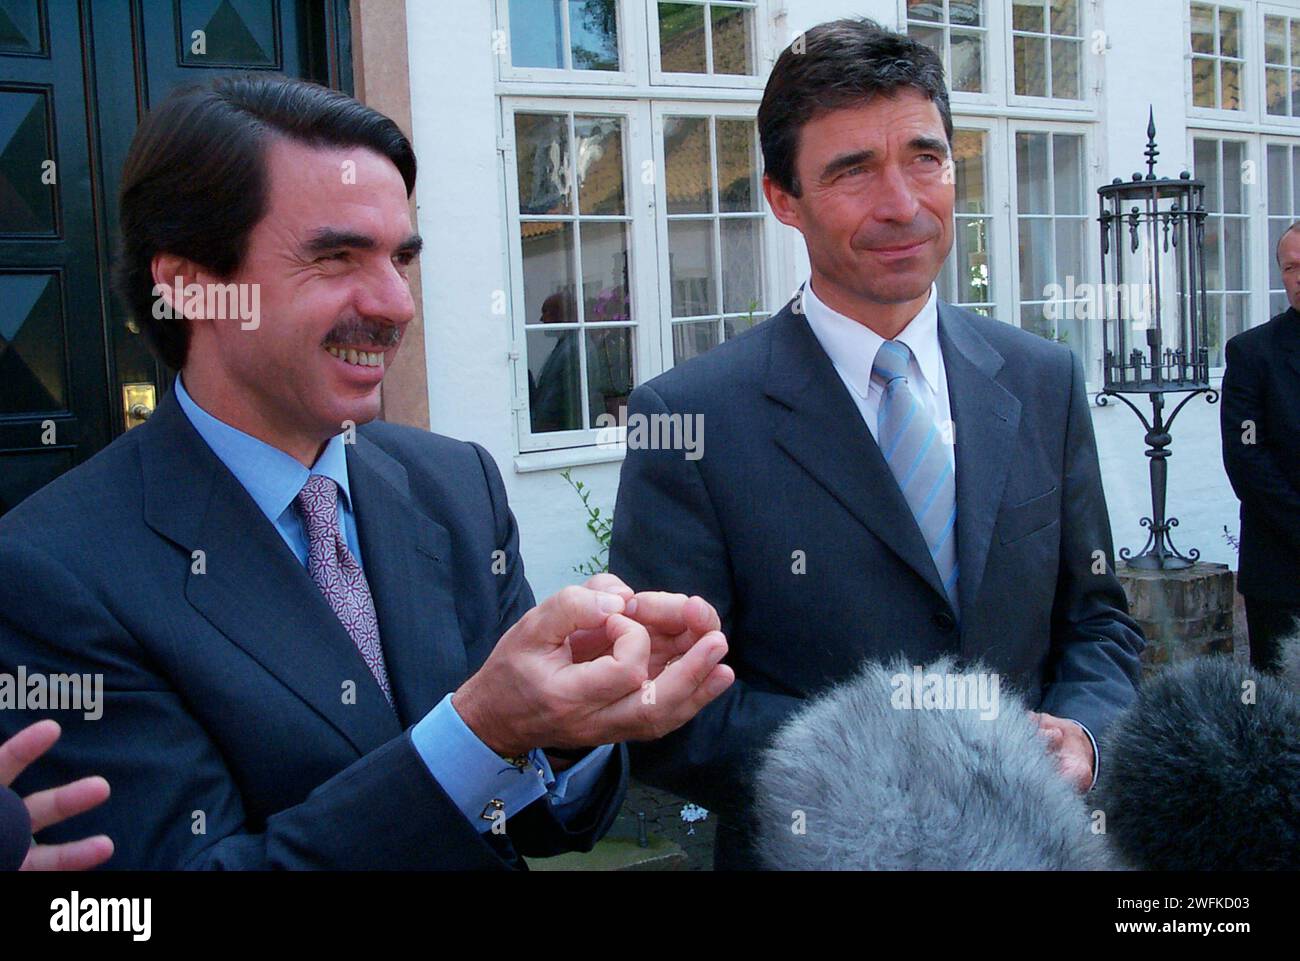 June 18,2002-Danish Prime minister Anders Fogh Rasmussen welcome Spanish Prime minister Jose Maria Aznar at Marienborg Lyngby,after talk bothe Prime minister hold joint press conference at Marienborg,Lyngby Denmark Stock Photo